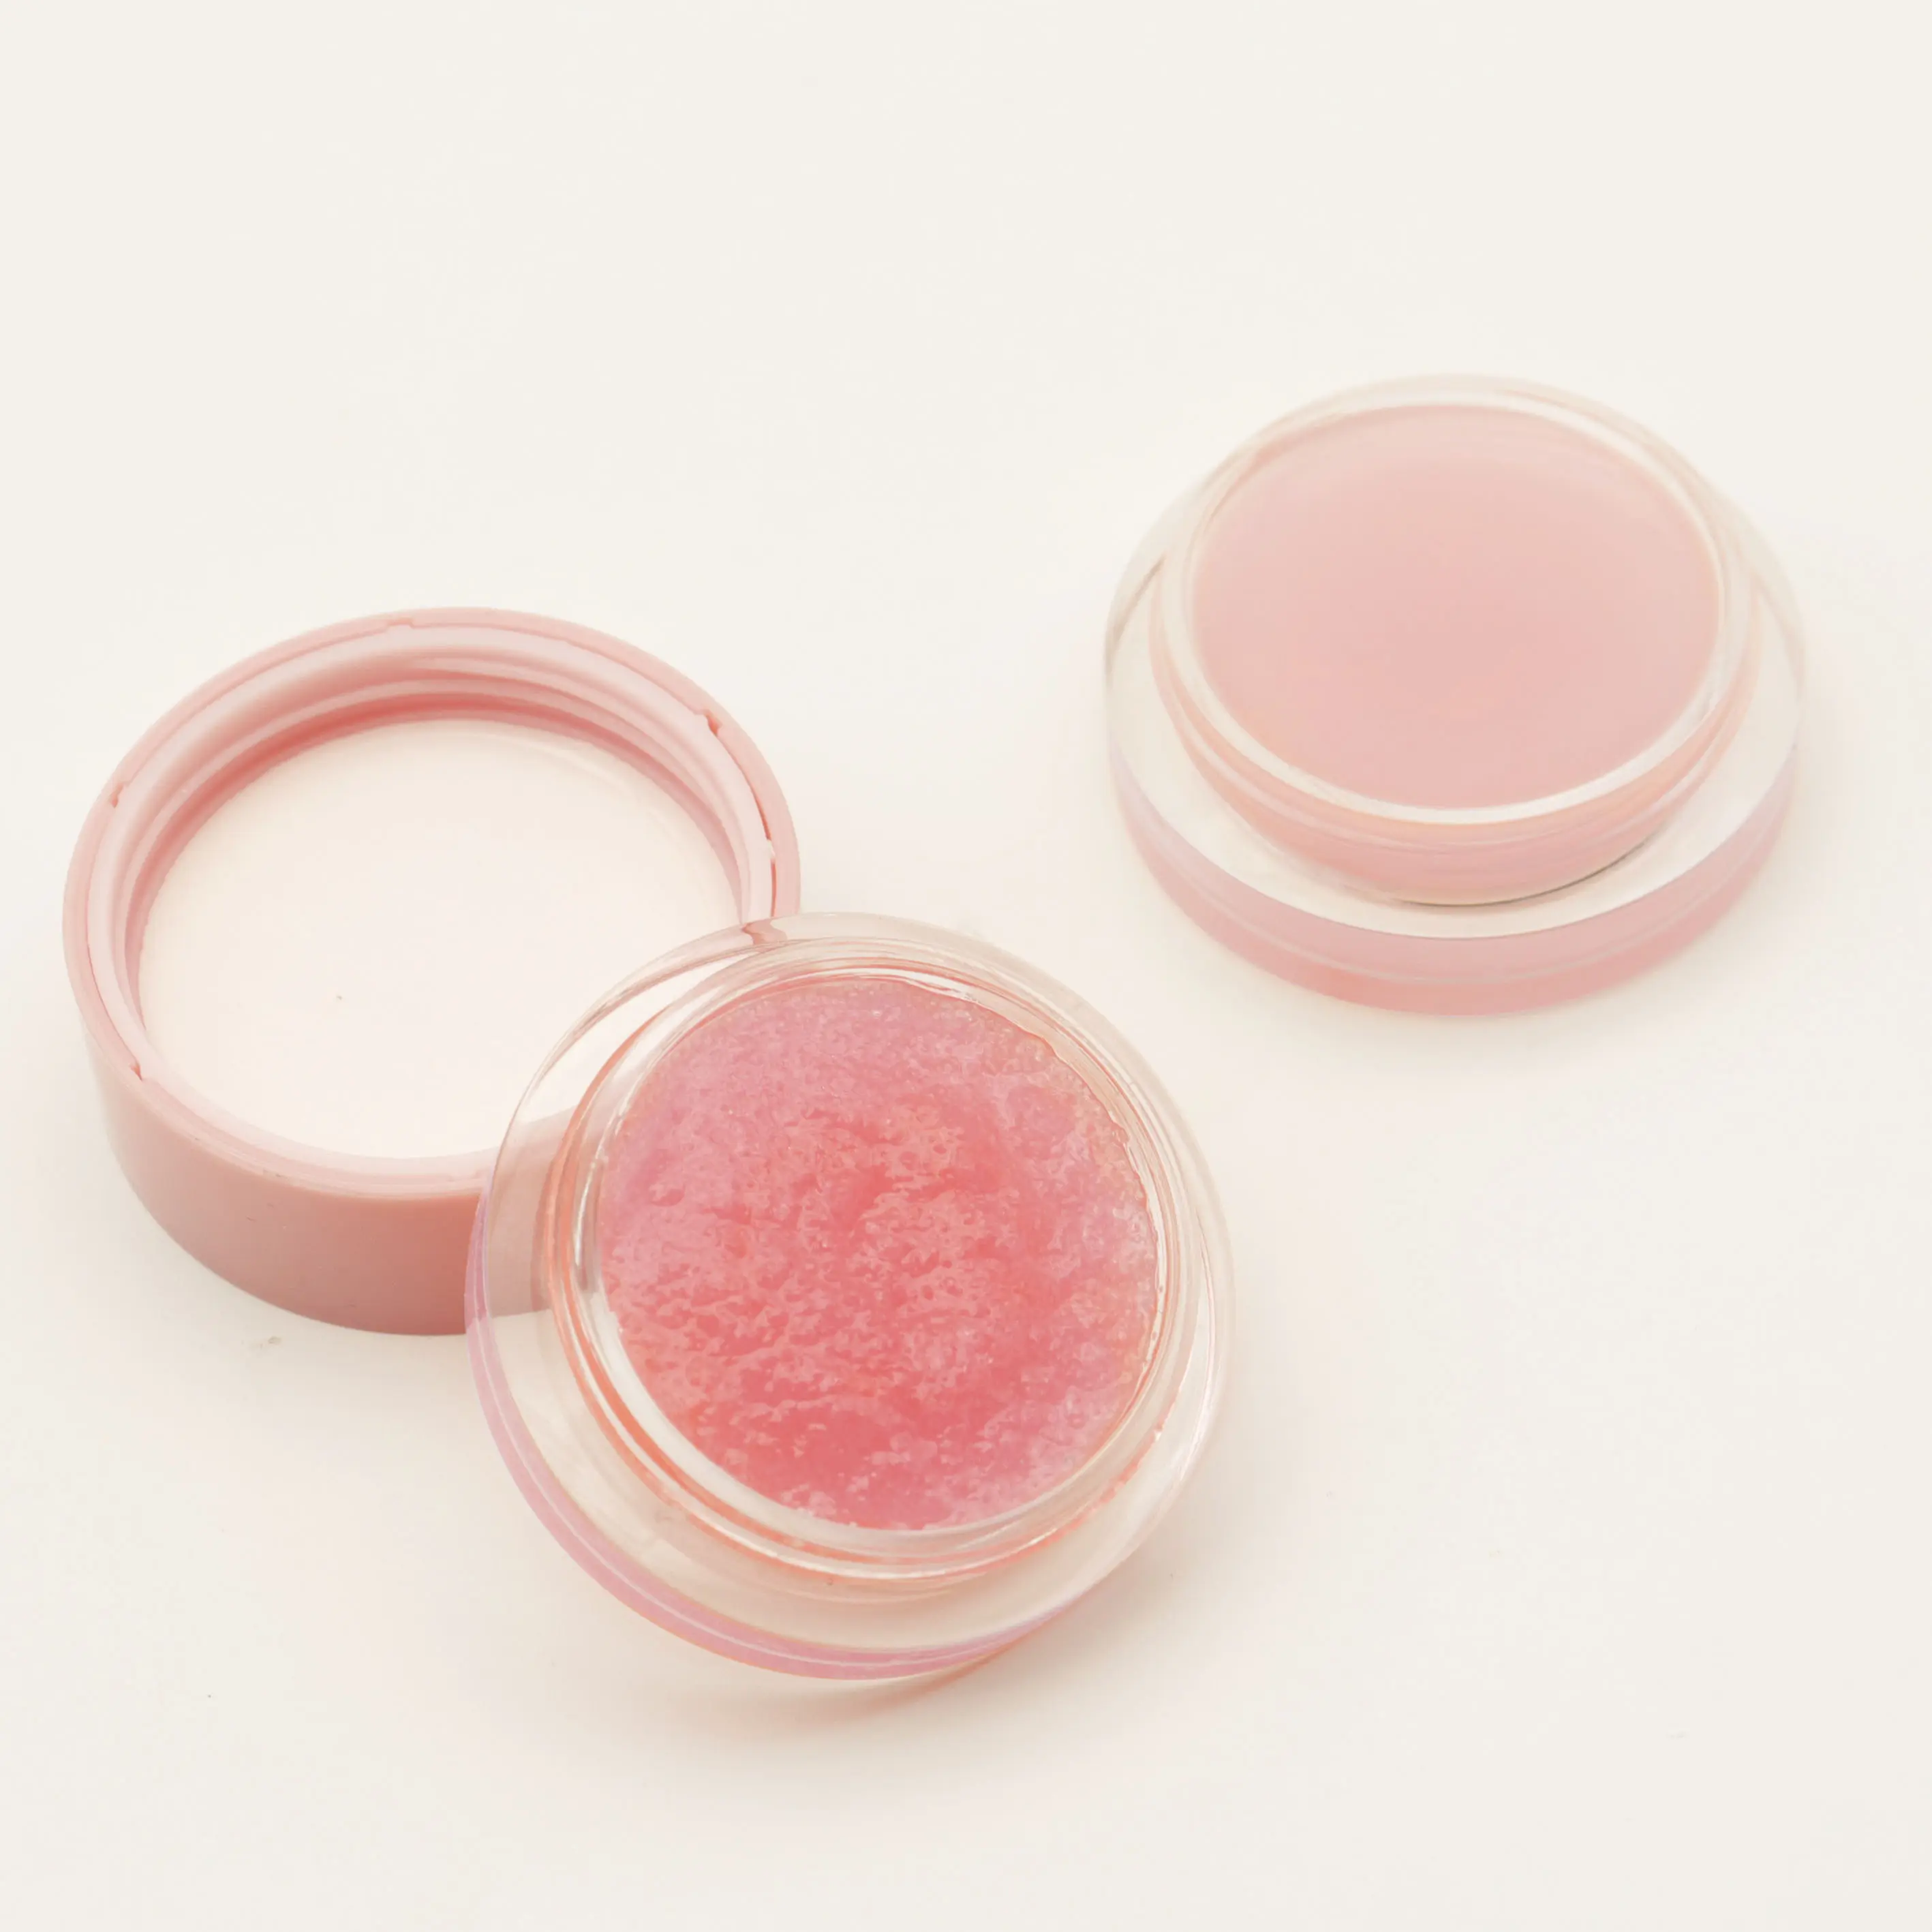 High Quality Lip Scrub Containers with Spoon 6 Flavors Private Label Lip Scrub for Dry Lips Excellent Value